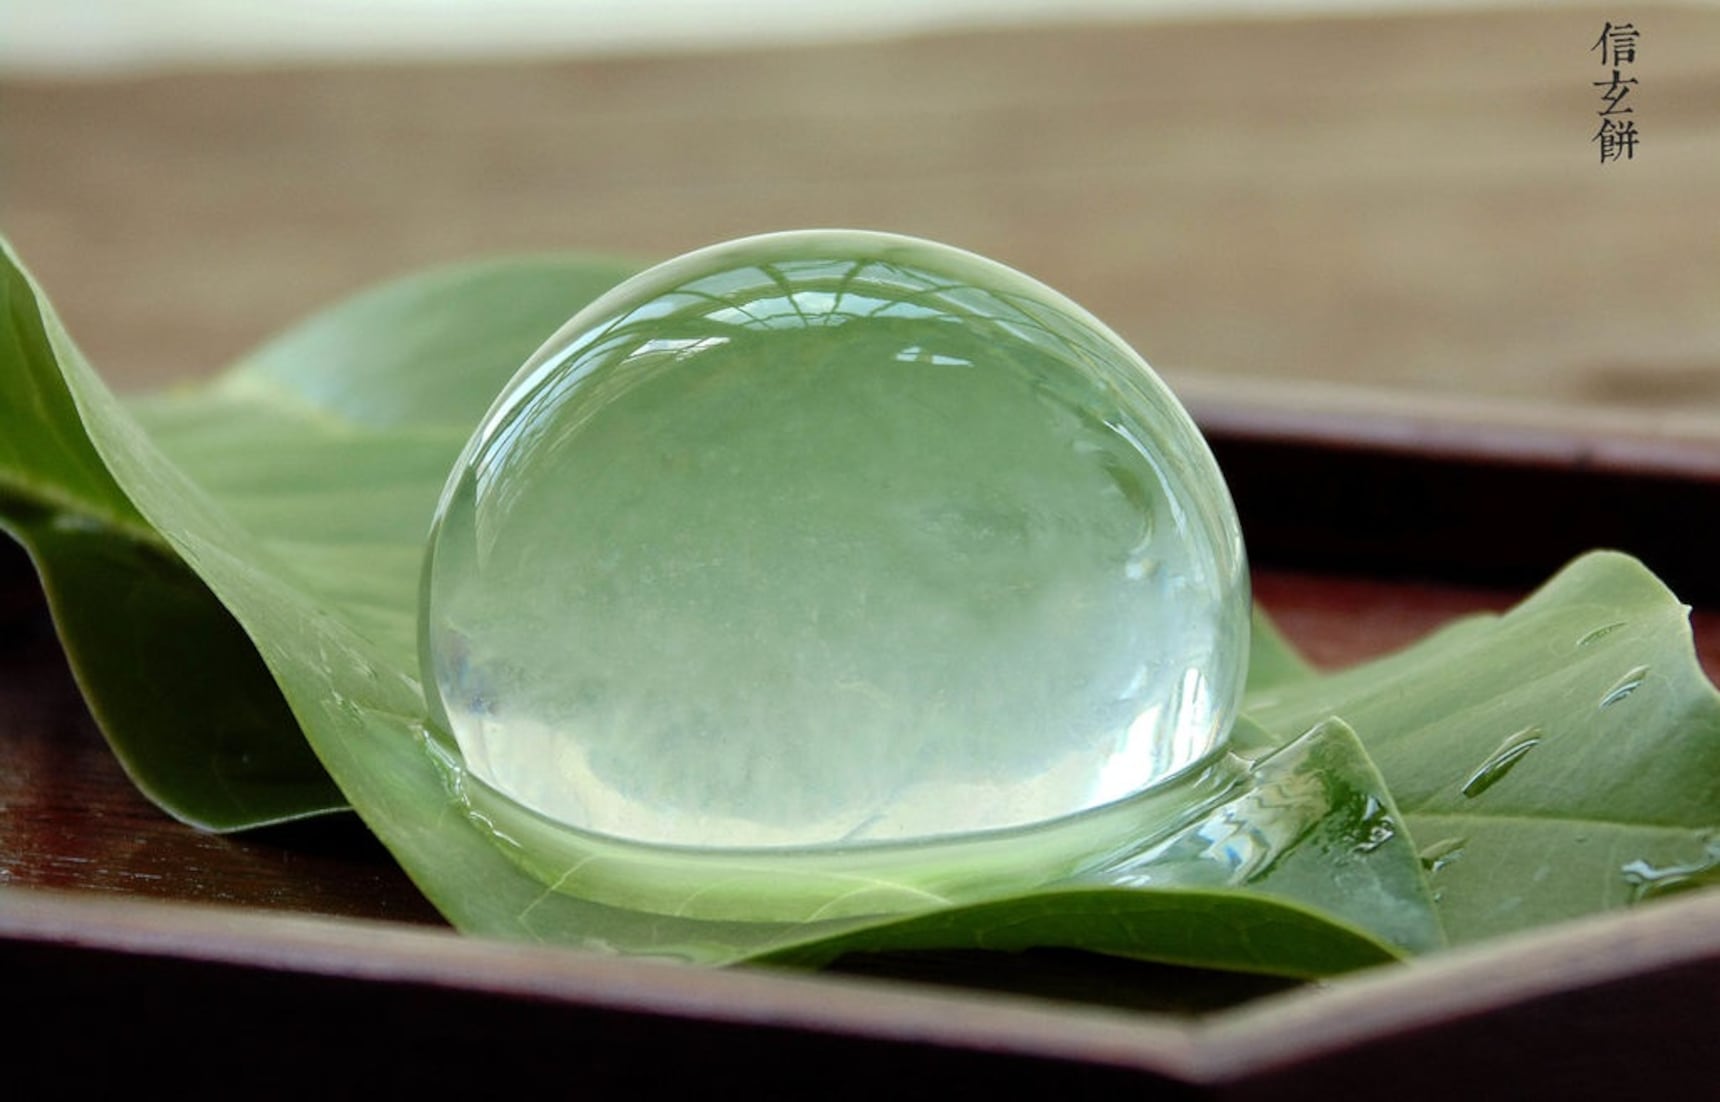 10 Rare Japanese Sweets & Drinks